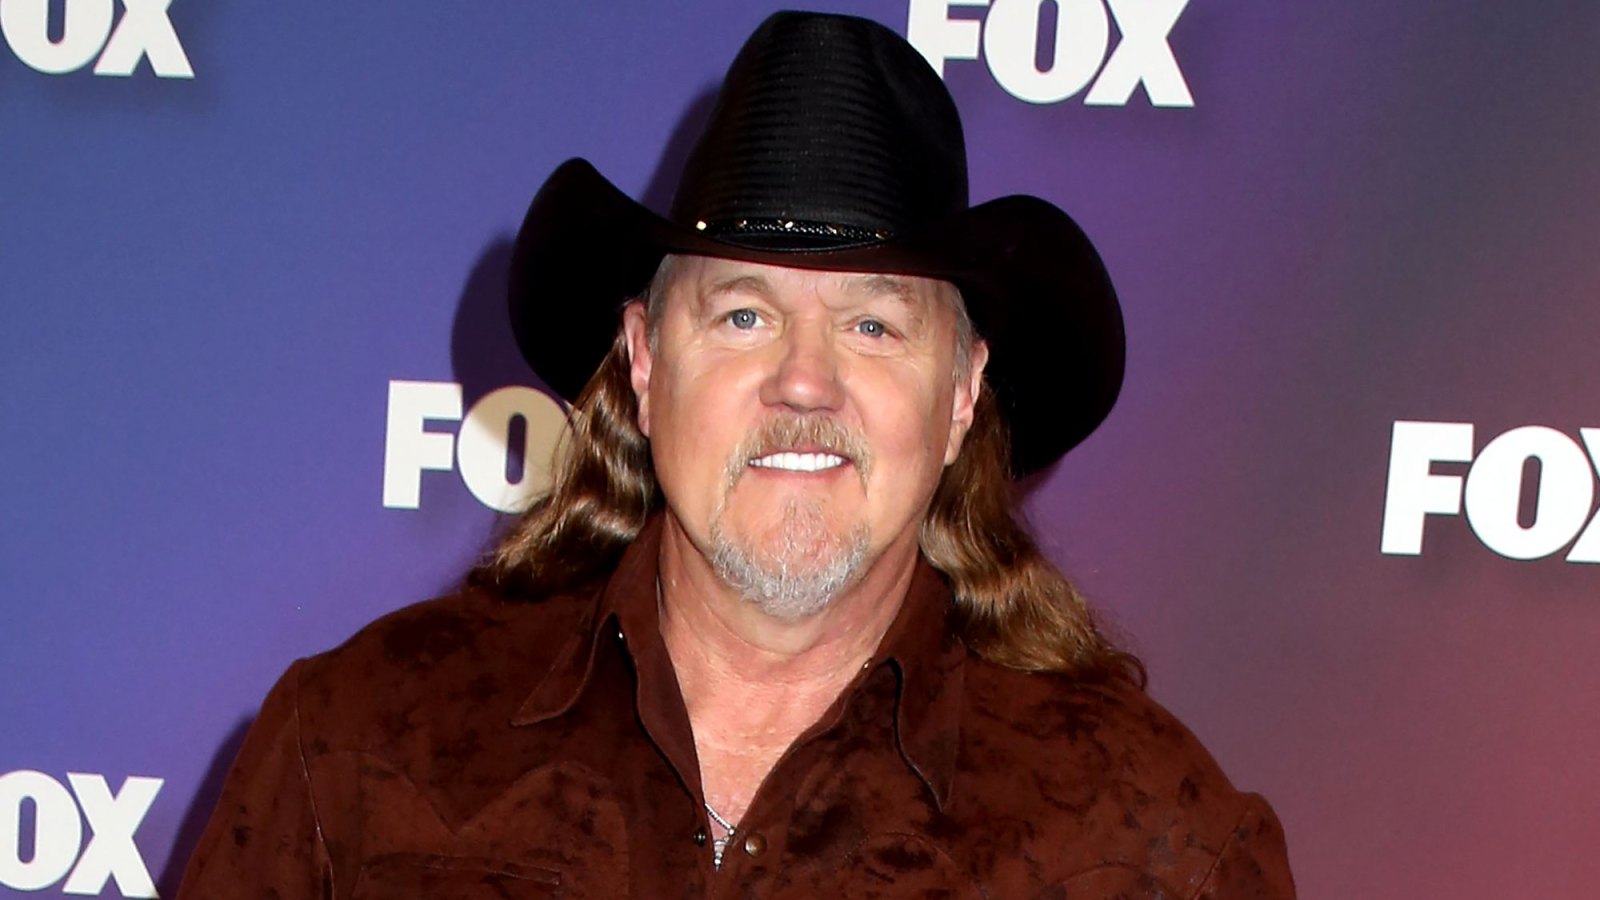 Trace Adkins: 25 Things You Don't Know About Me